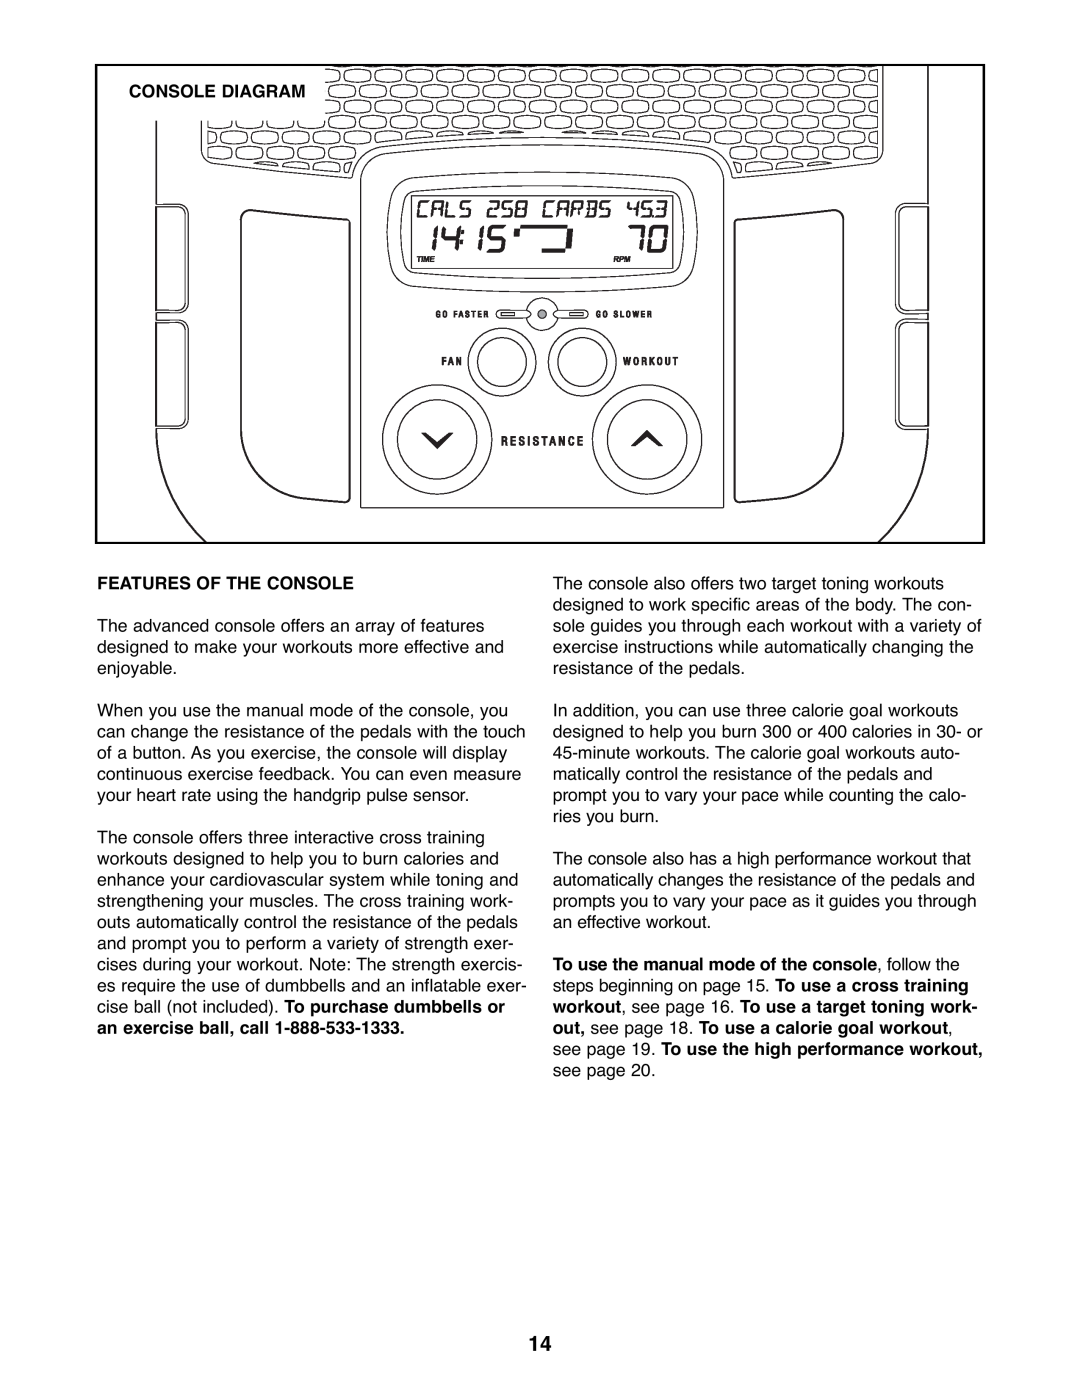 ProForm 831.23744.0 user manual Console Diagram, Features Of The Console 